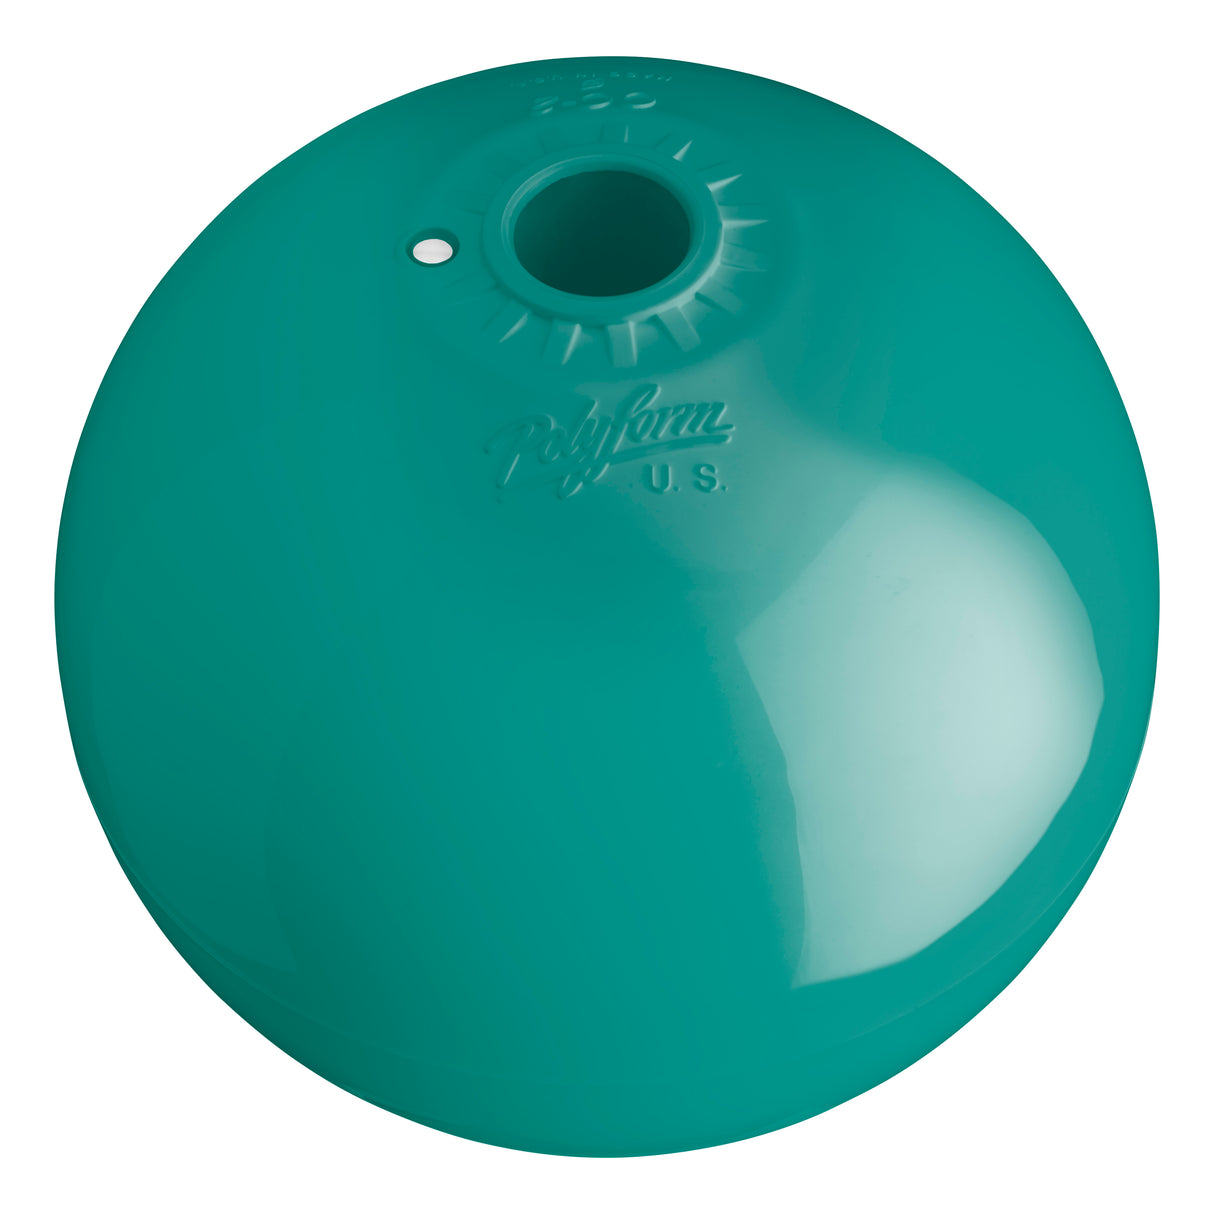 Hole through center mooring and marker buoy, Polyform CC-4 Teal angled shot